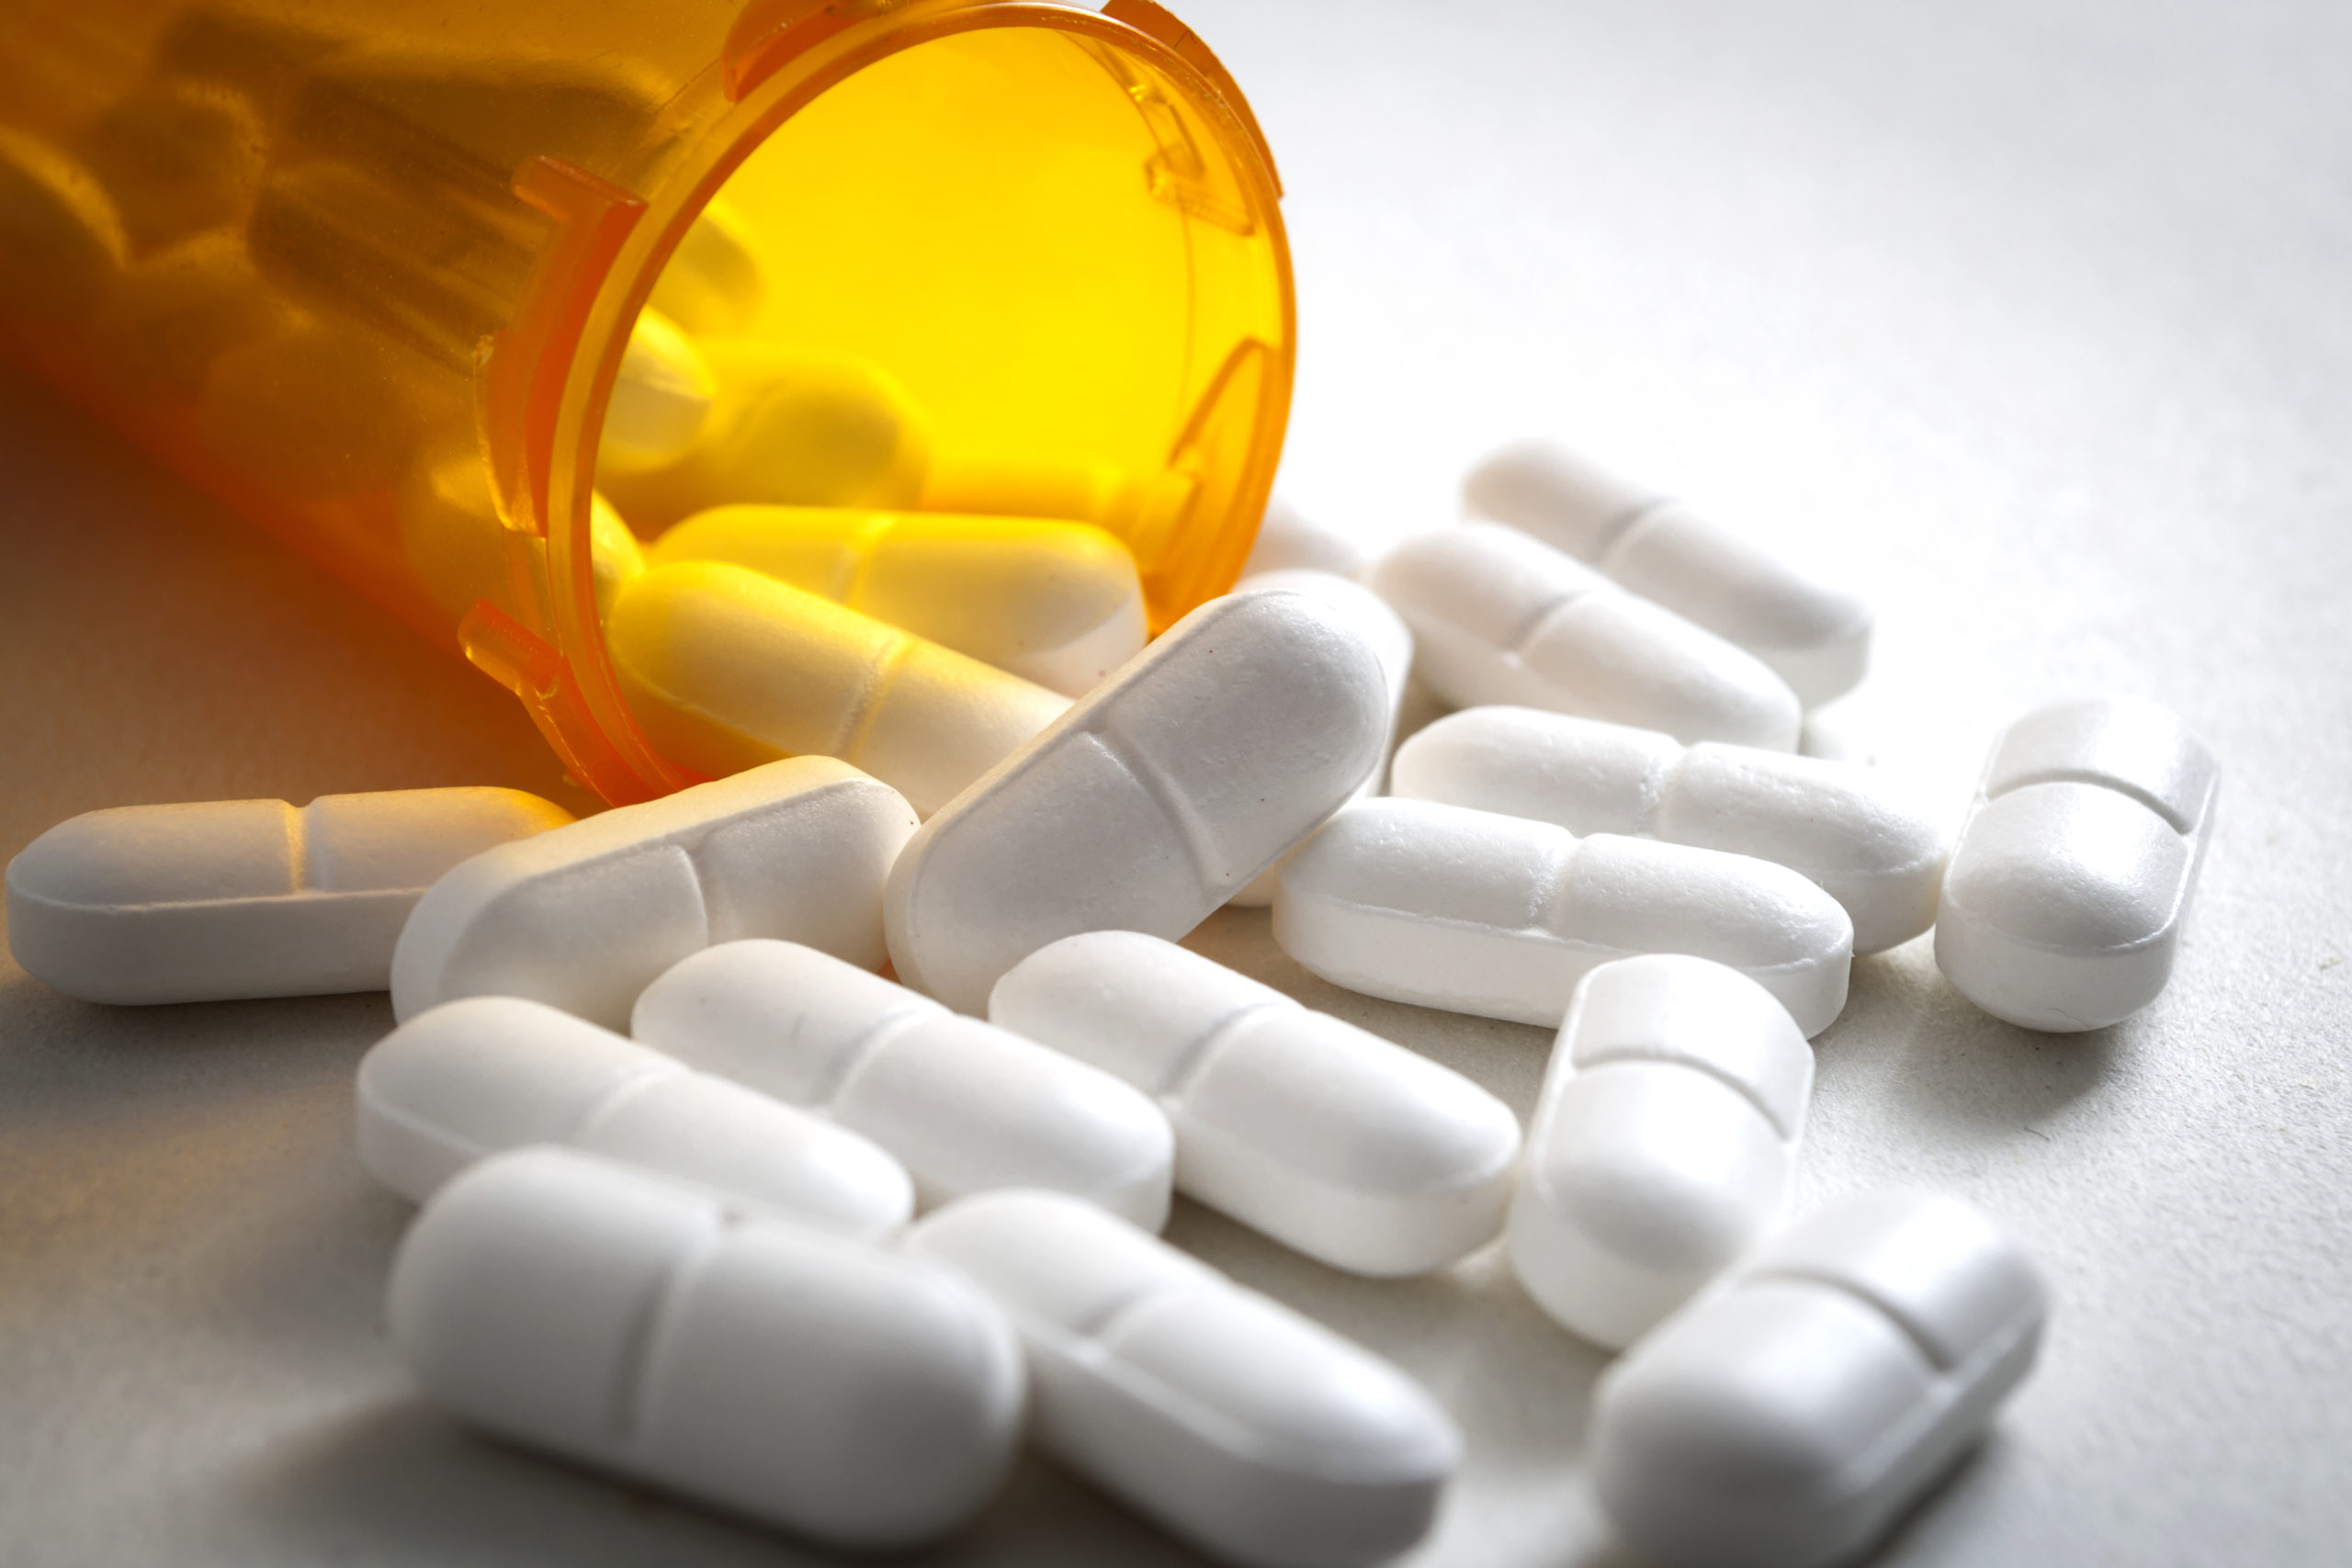 Painkiller Distributor Called Out By FDA